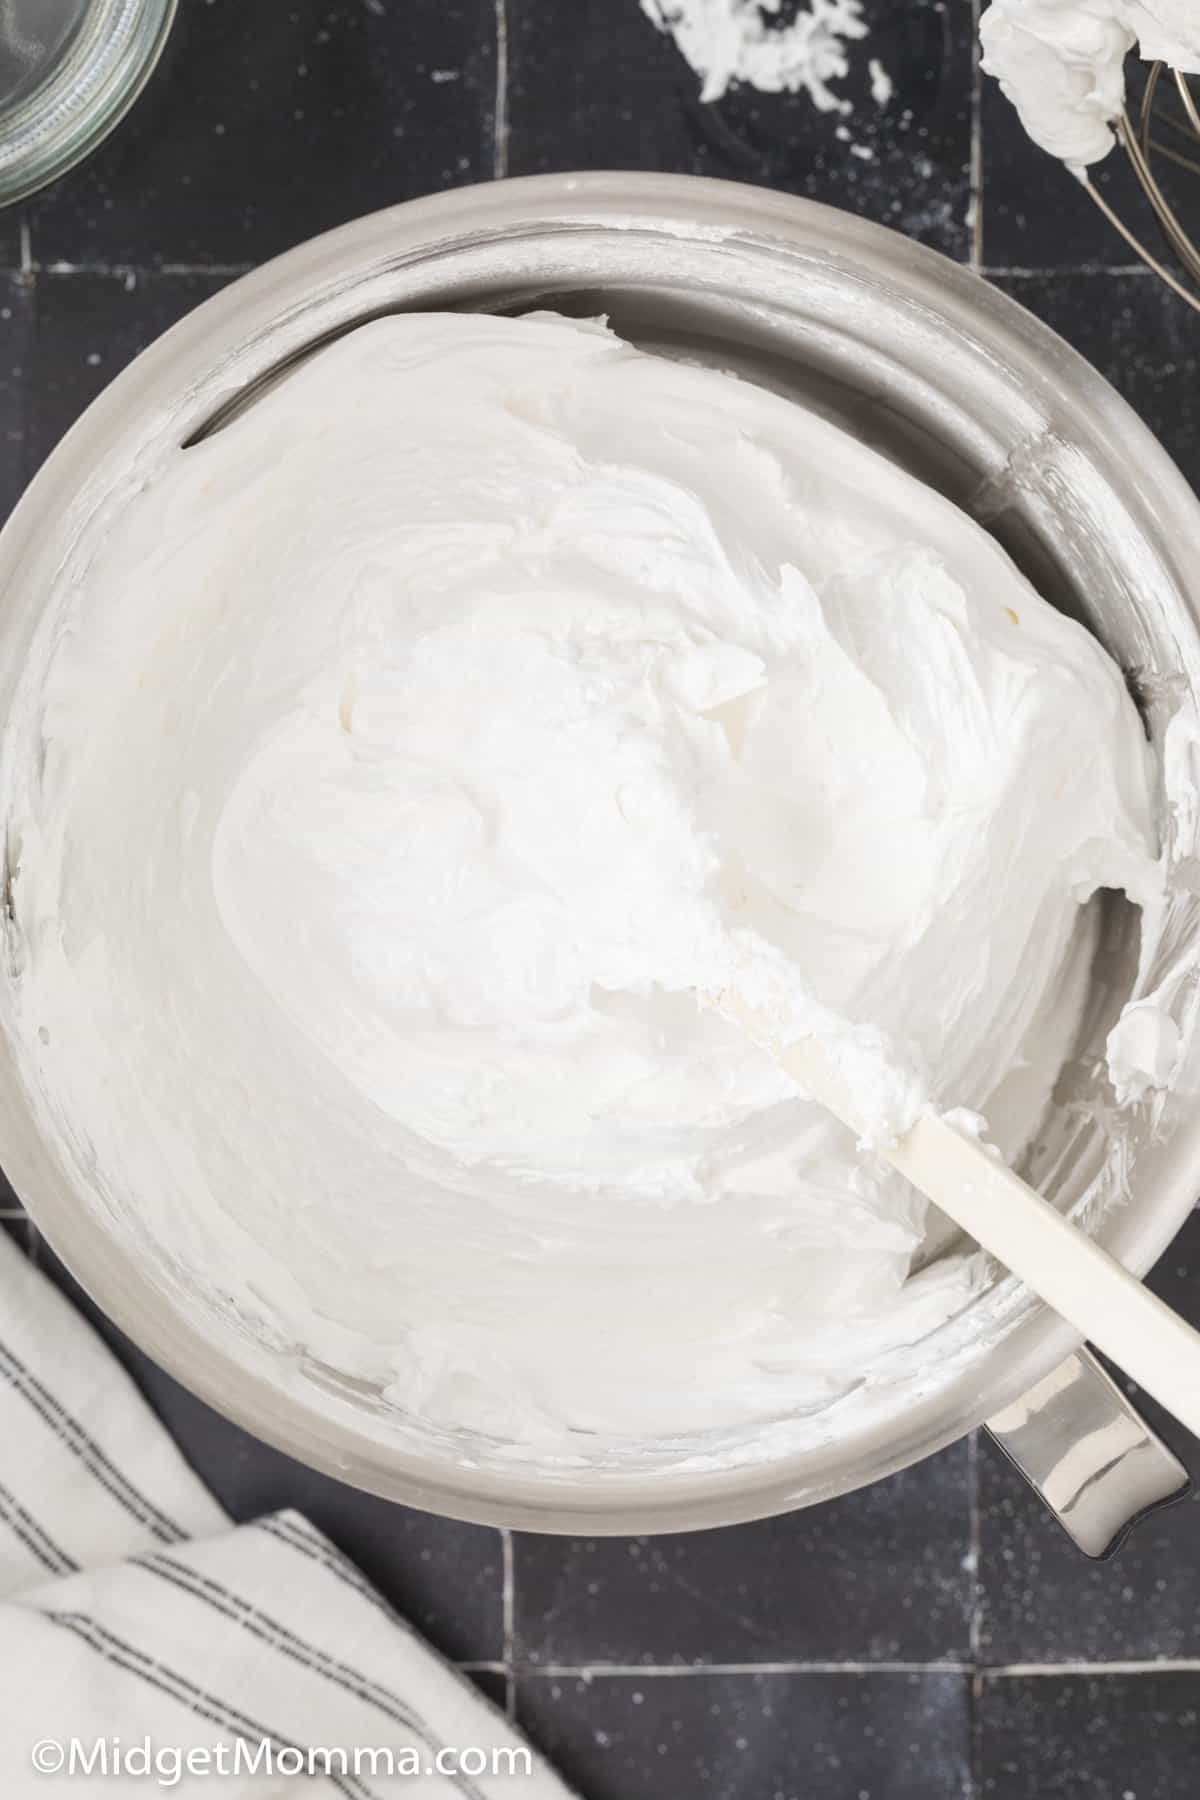 Mixing bowl of finished marshmallow fluff